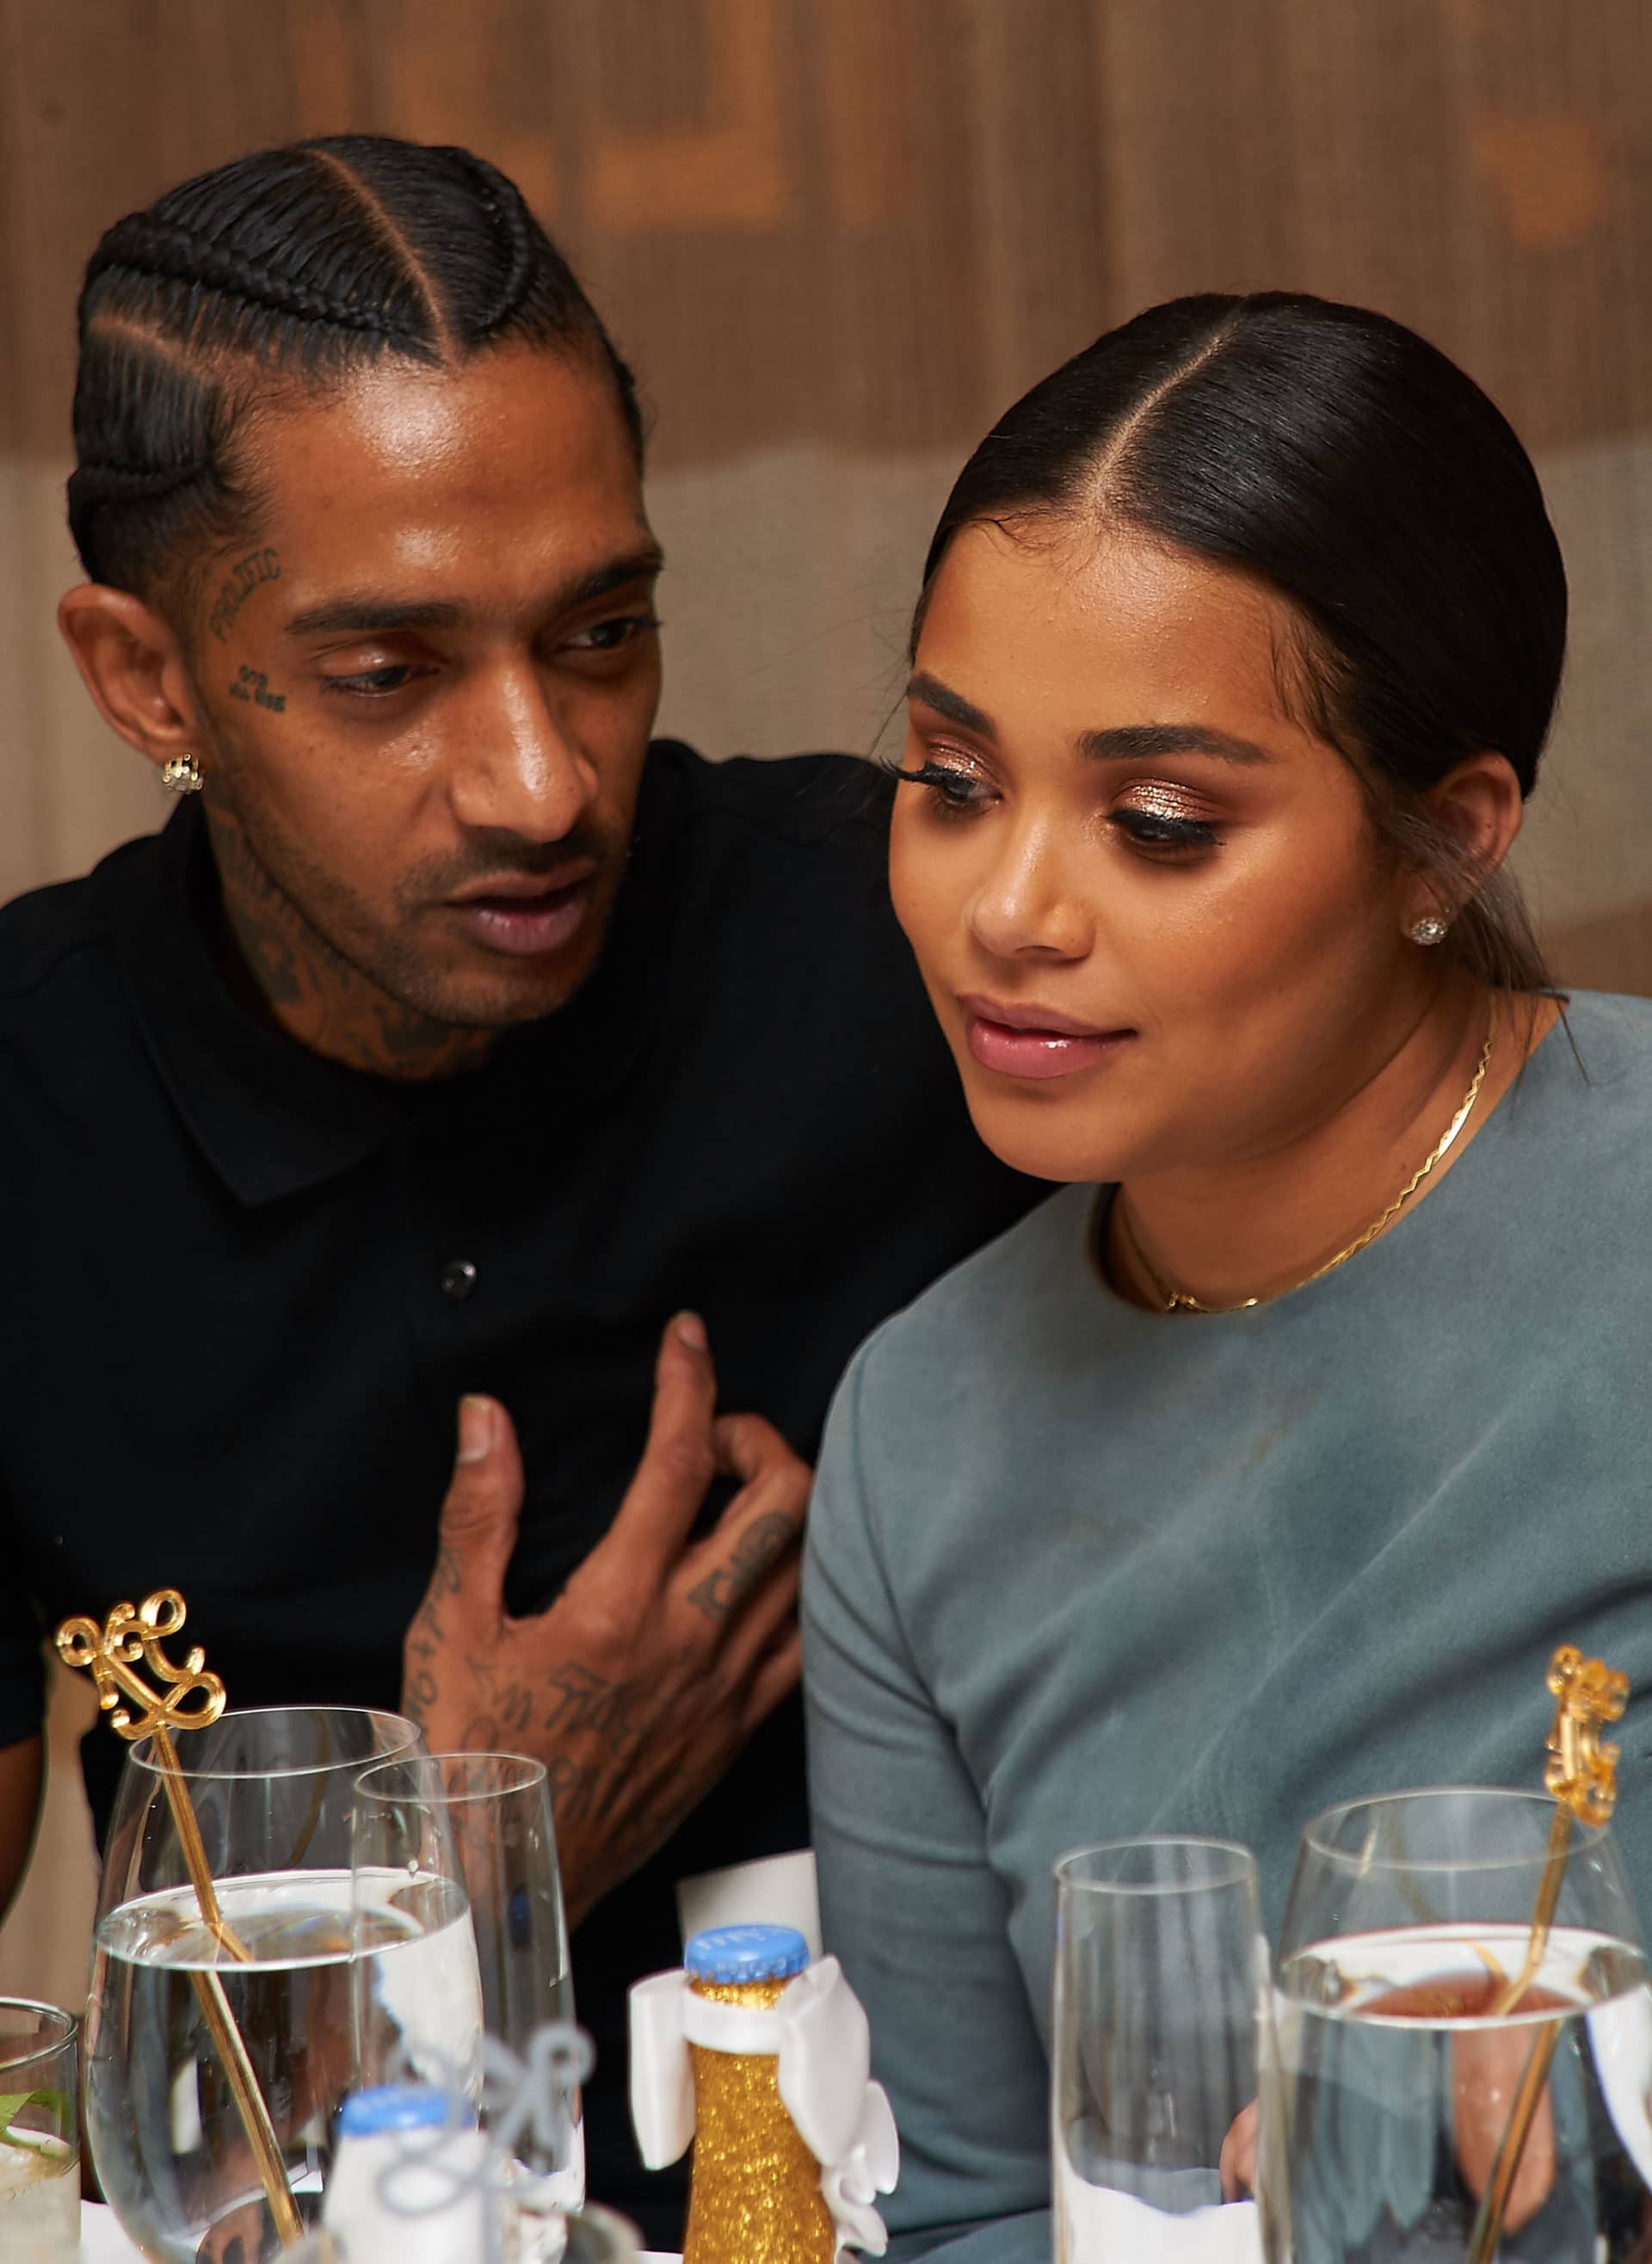 A Look Back At The Love Nipsey Hussle and Lauren London Shared